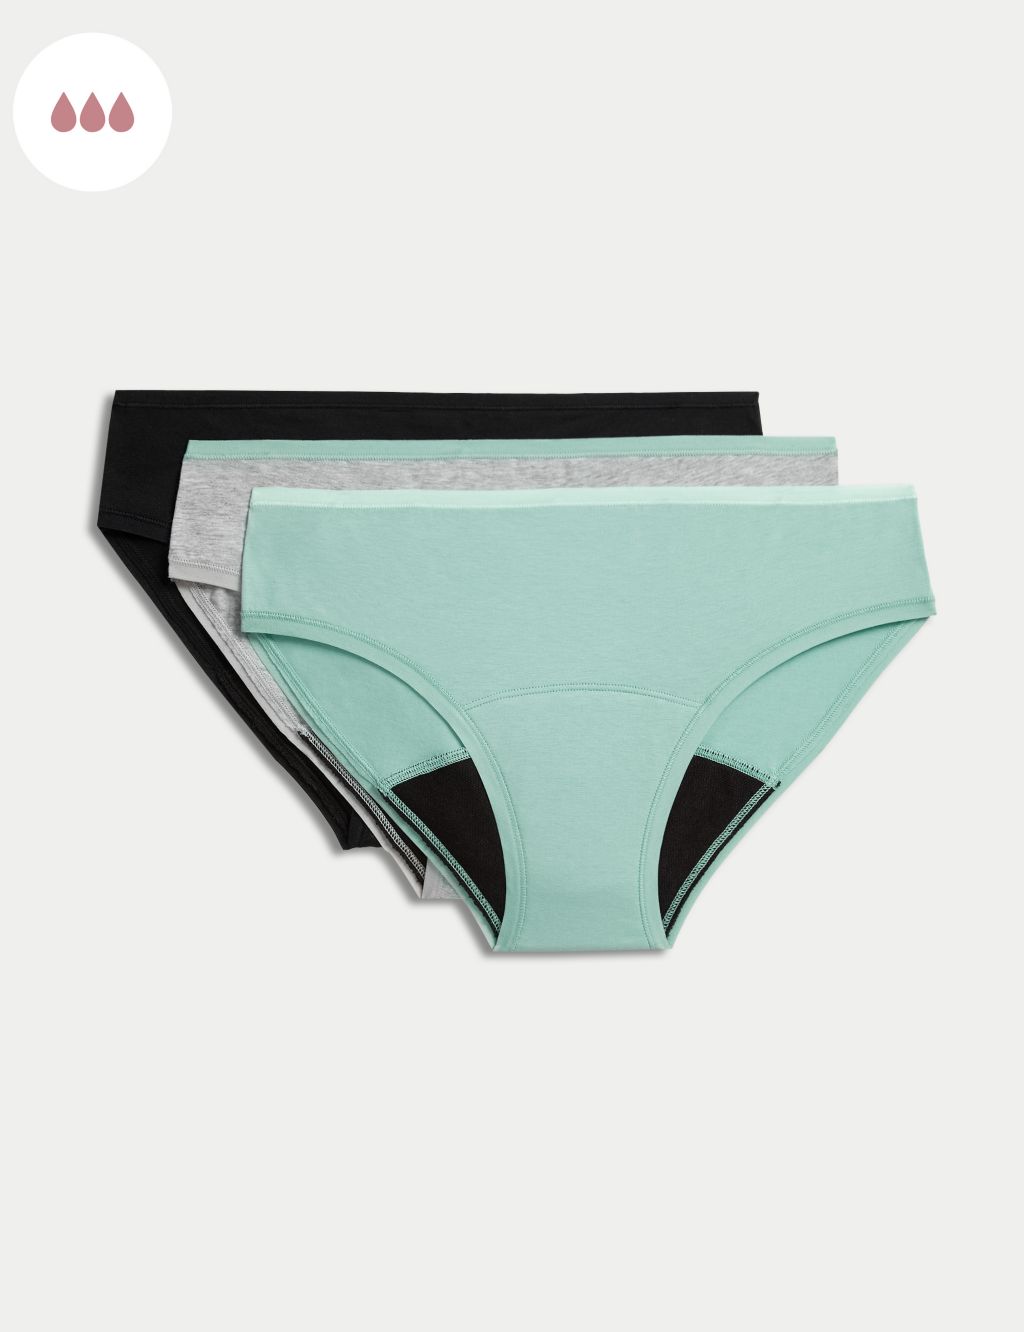 Low-Rise Knickers